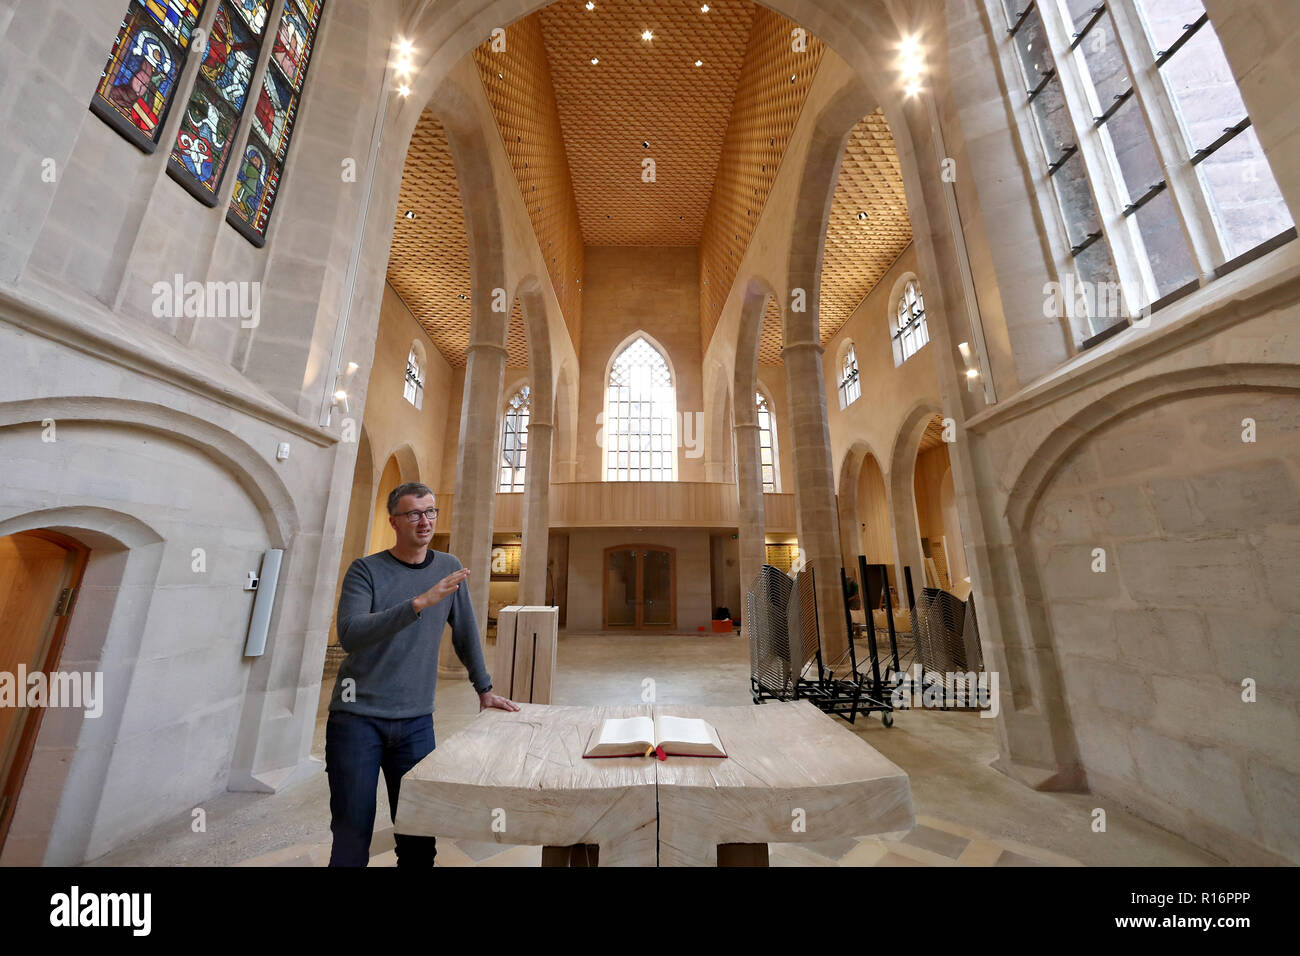 08 November 2018, Bavaria, Nürnberg: Georg Rieger, coordinator of the reconstruction of St. Martha's Church, stands at the Communion table in the renovated building. After a fire with damage running into millions in June 2014, the Nuremberg Church of St. Martha reopens on 10 November. During the fire, the roof of the main nave was completely burnt down and parts of the building were in danger of collapsing. Photo: Daniel Karmann/dpa Stock Photo